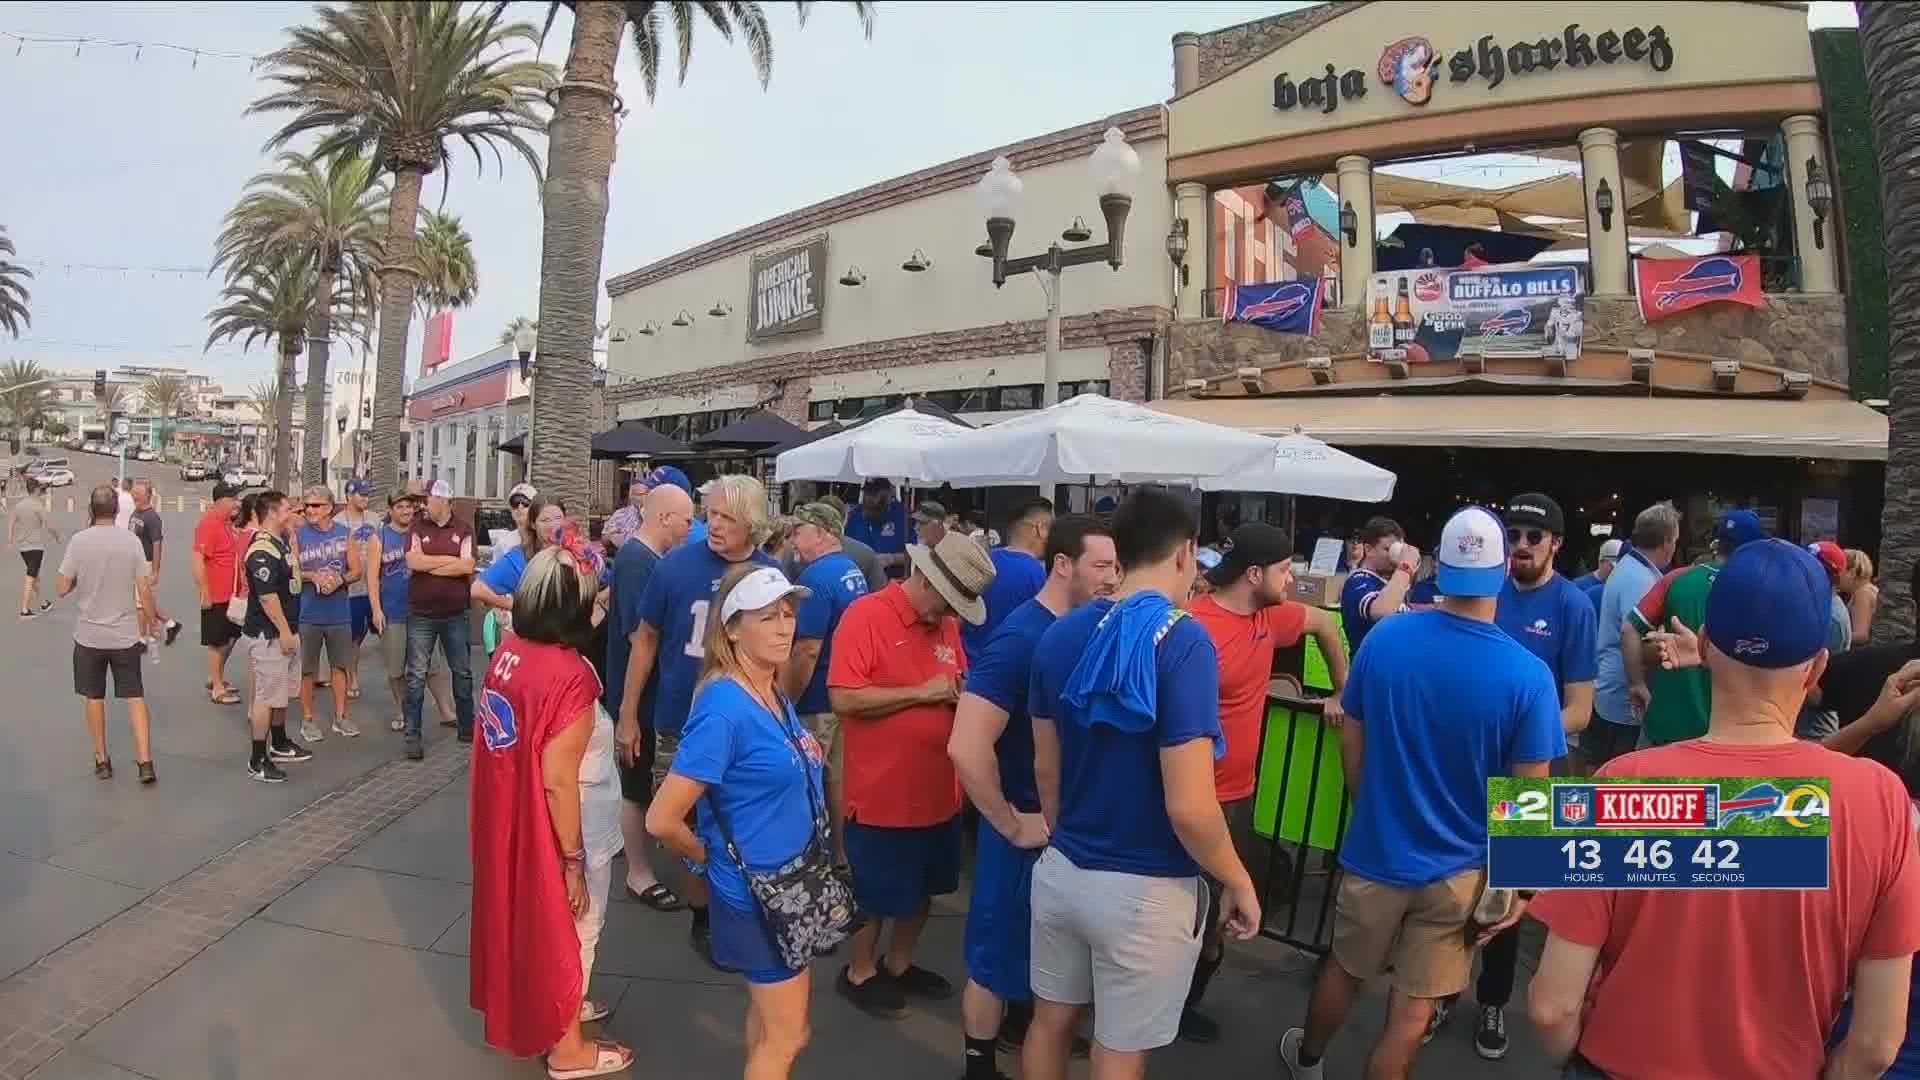 Bills fans take over The City of Angels